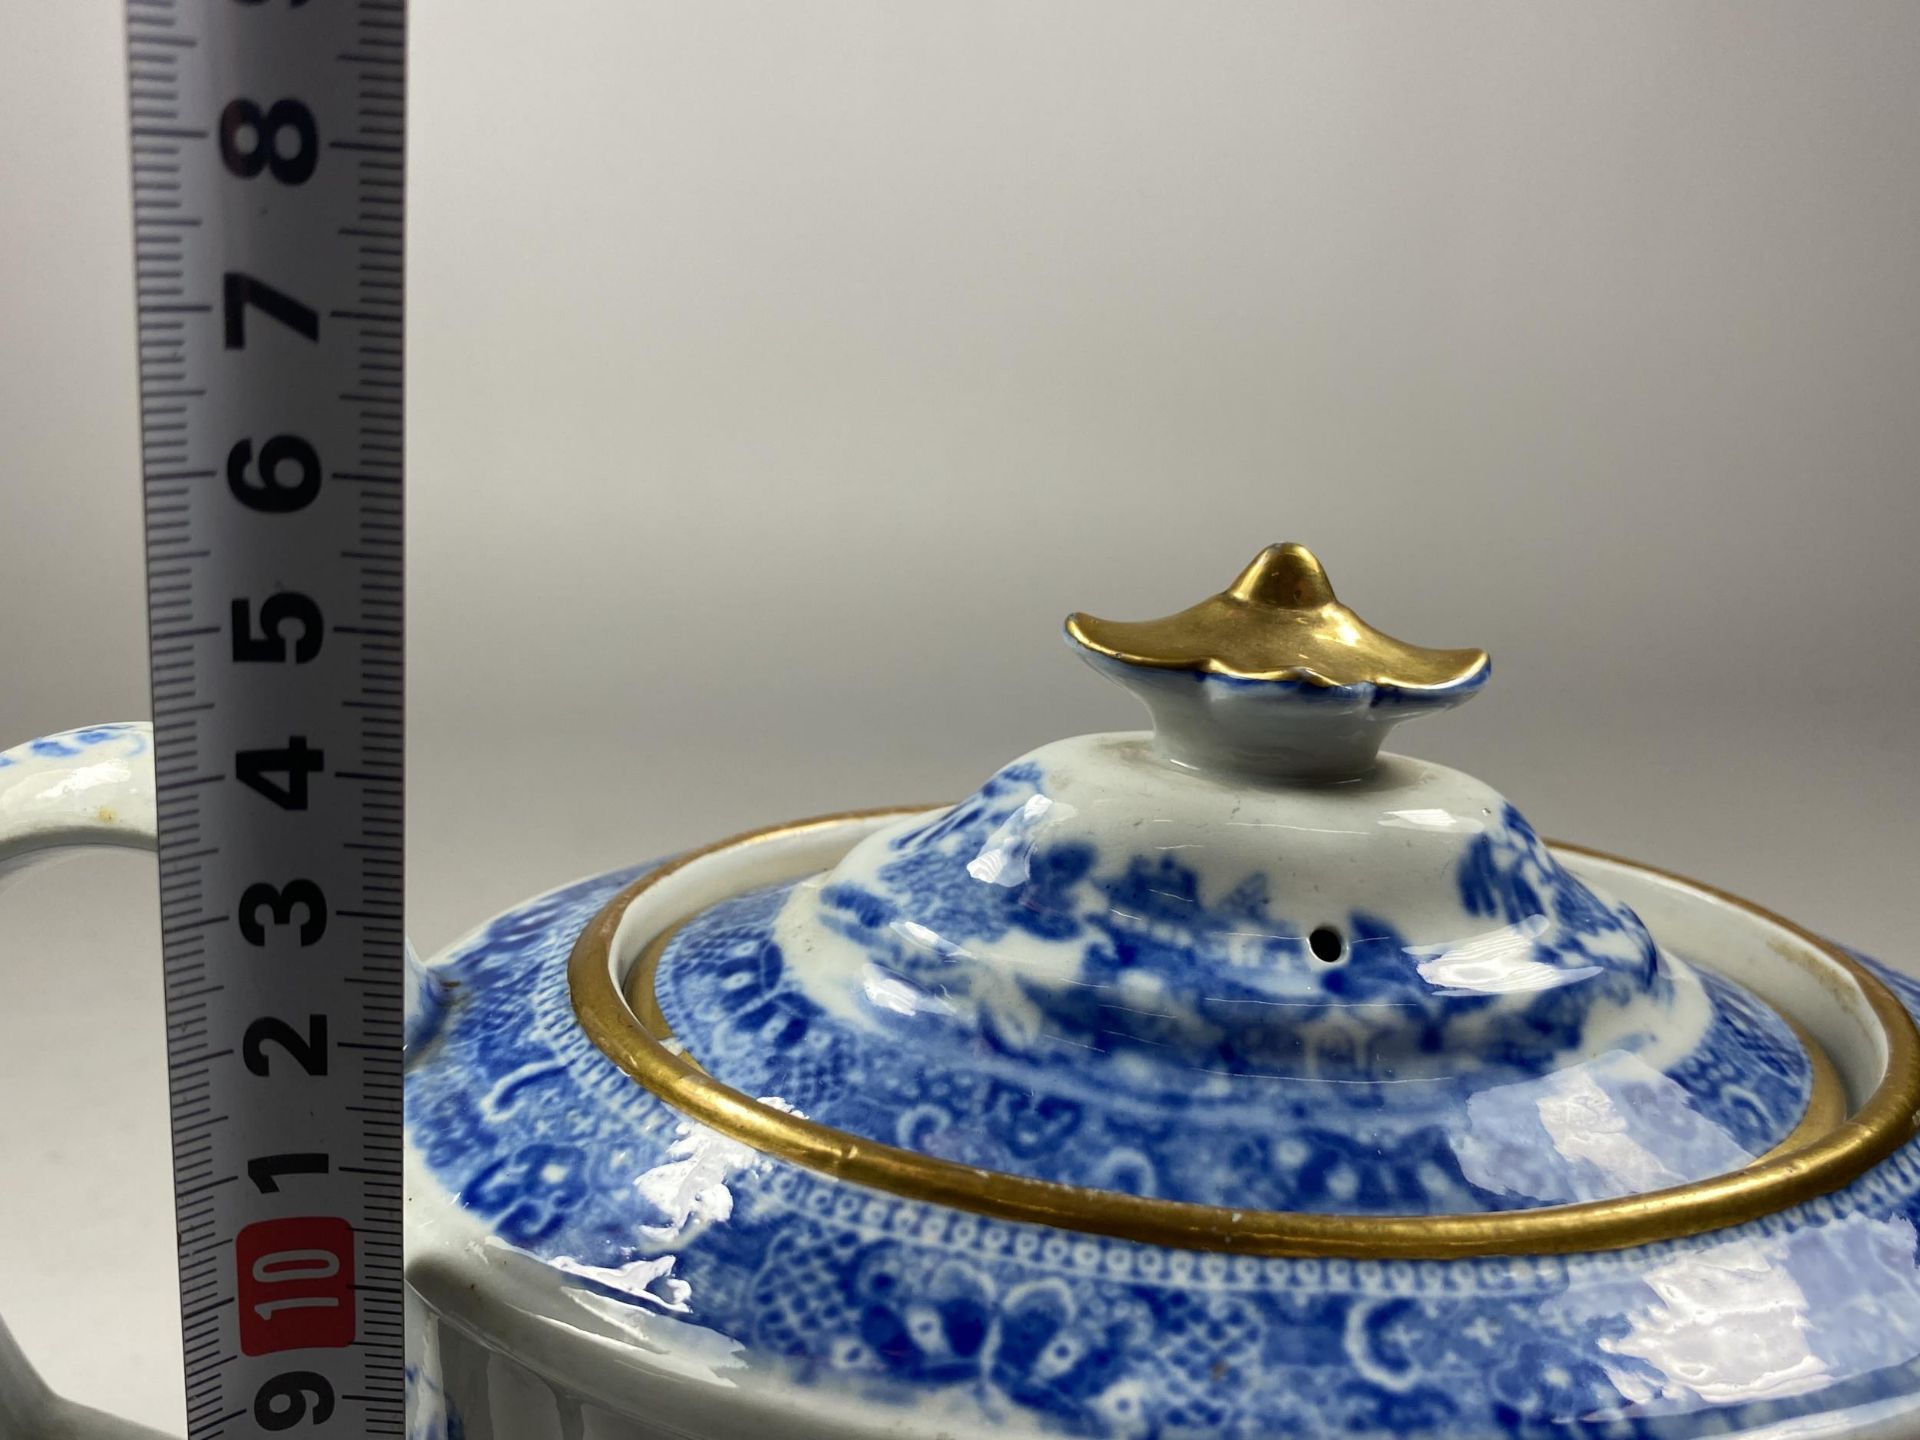 A CHINESE QING BLUE & WHITE EXPORT PORCELAIN TEAPOT WITH PAGODA DESIGN, HEIGHT 15CM - Image 6 of 6